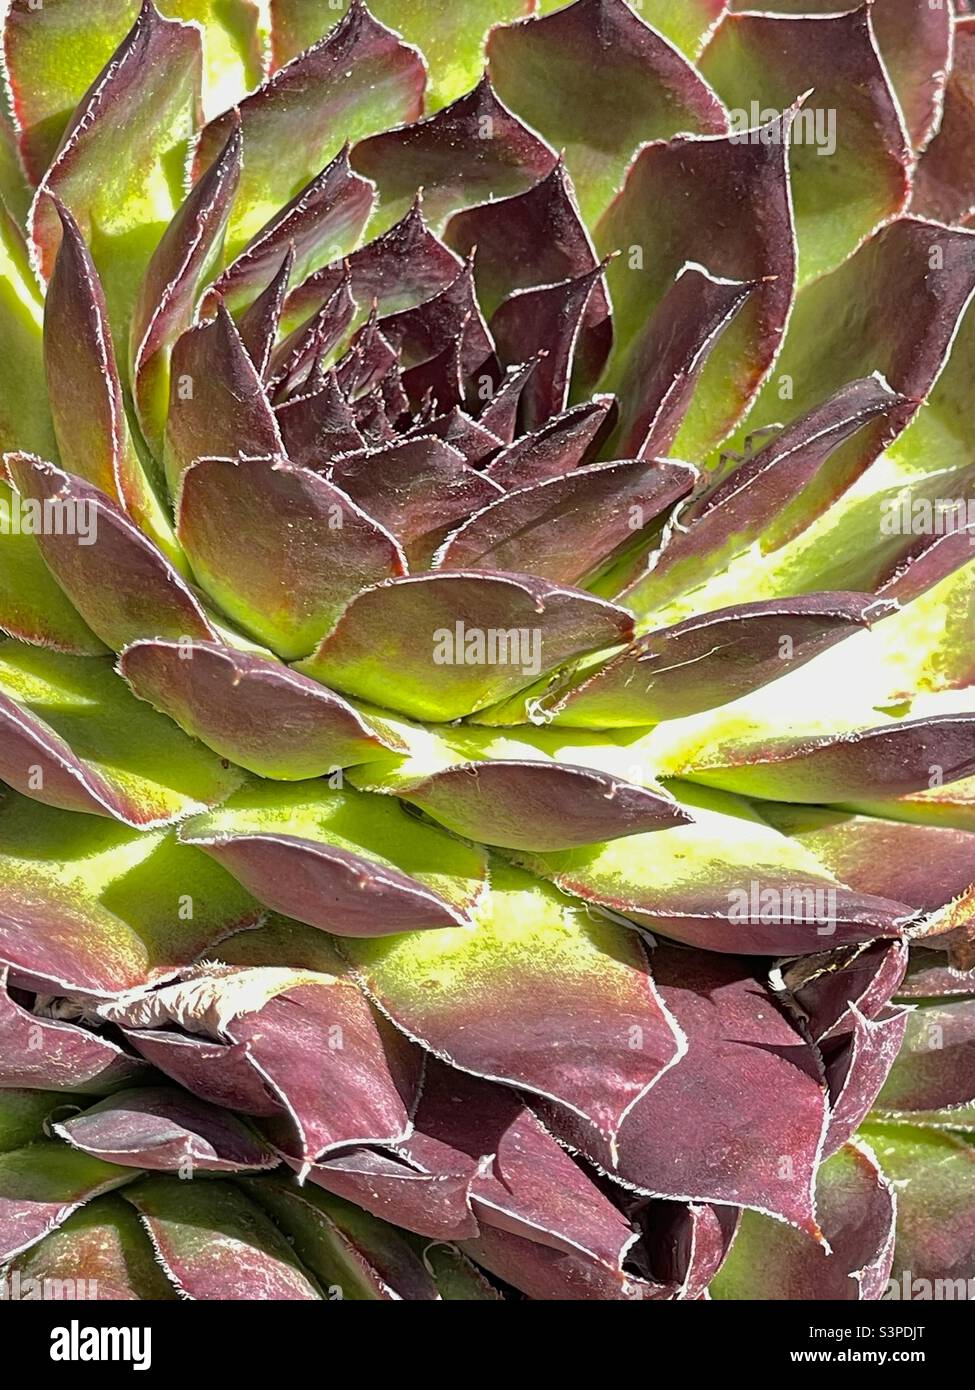 A close view of a lush succulent, or cactus plant, in a planter bed in Utah, USA. A great plant in Utah’s drier climate for water conservation. Stock Photo